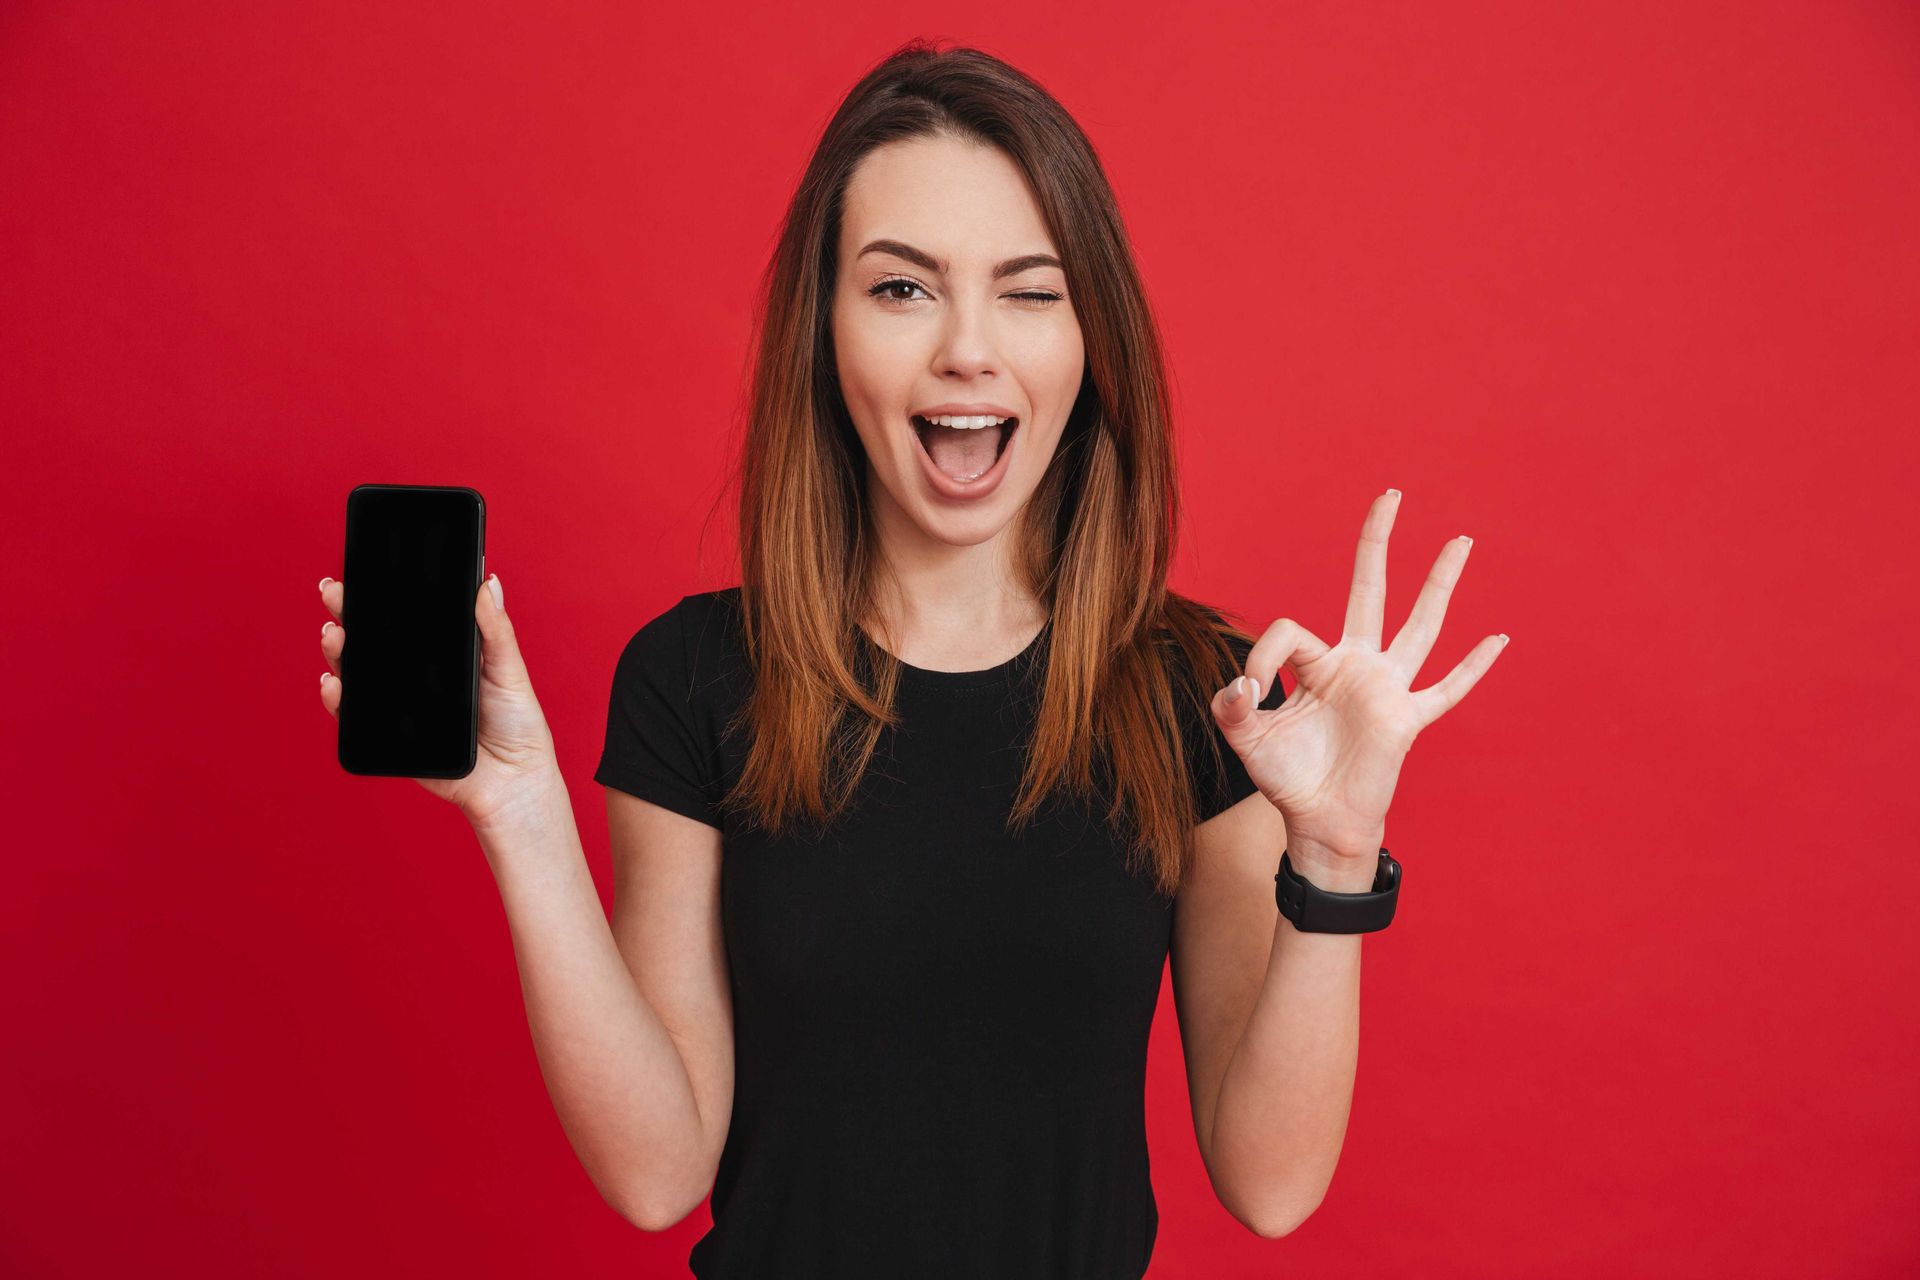 A profressional photograph with red background of business woman holding a smartphone